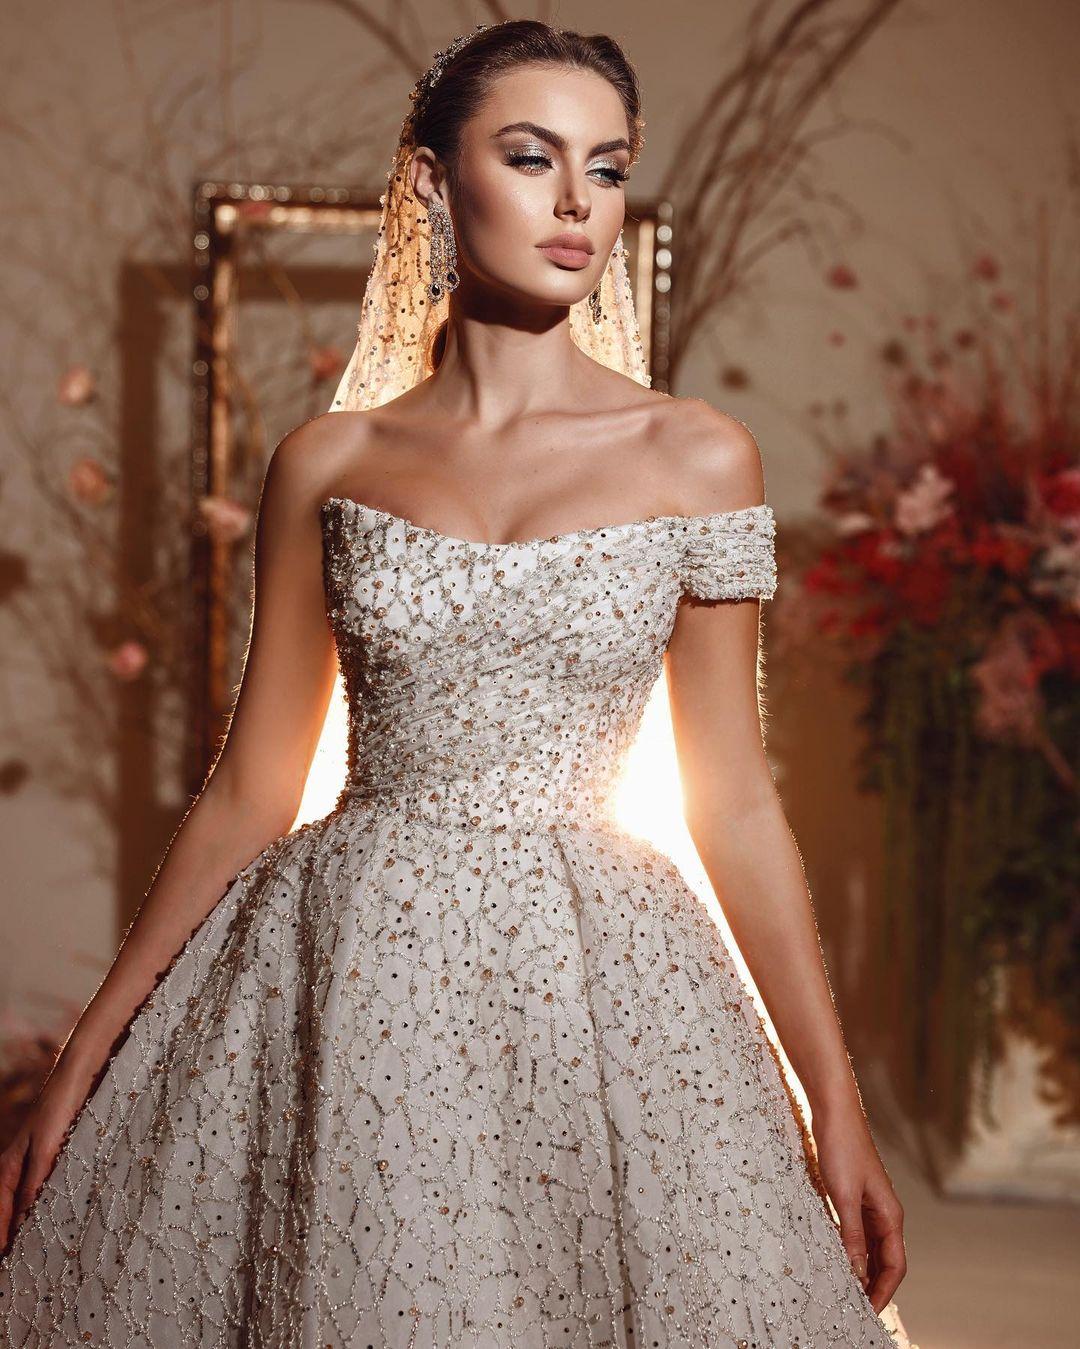 Reem Kachmar Bridal collection 2022 
Fabulously combine ultra feminine structured corset bodice with shimmering beaded patterns and exquisite feather and floral applique for a Glamours Modern and Timeless Bride . 

#kachmarreem #reemkachmarcouture #reemkachmar #reemkachmar2022 #reemkachmarbridal22 #couture #fashion #brides #weddinggown #weddingdress #abudhabi #love #her #beirut #lebanon #riyadh #jeddah #dubai #cairo #kuwait #doha #instafashion #instacouture #kachmarreem #instabride #ss22